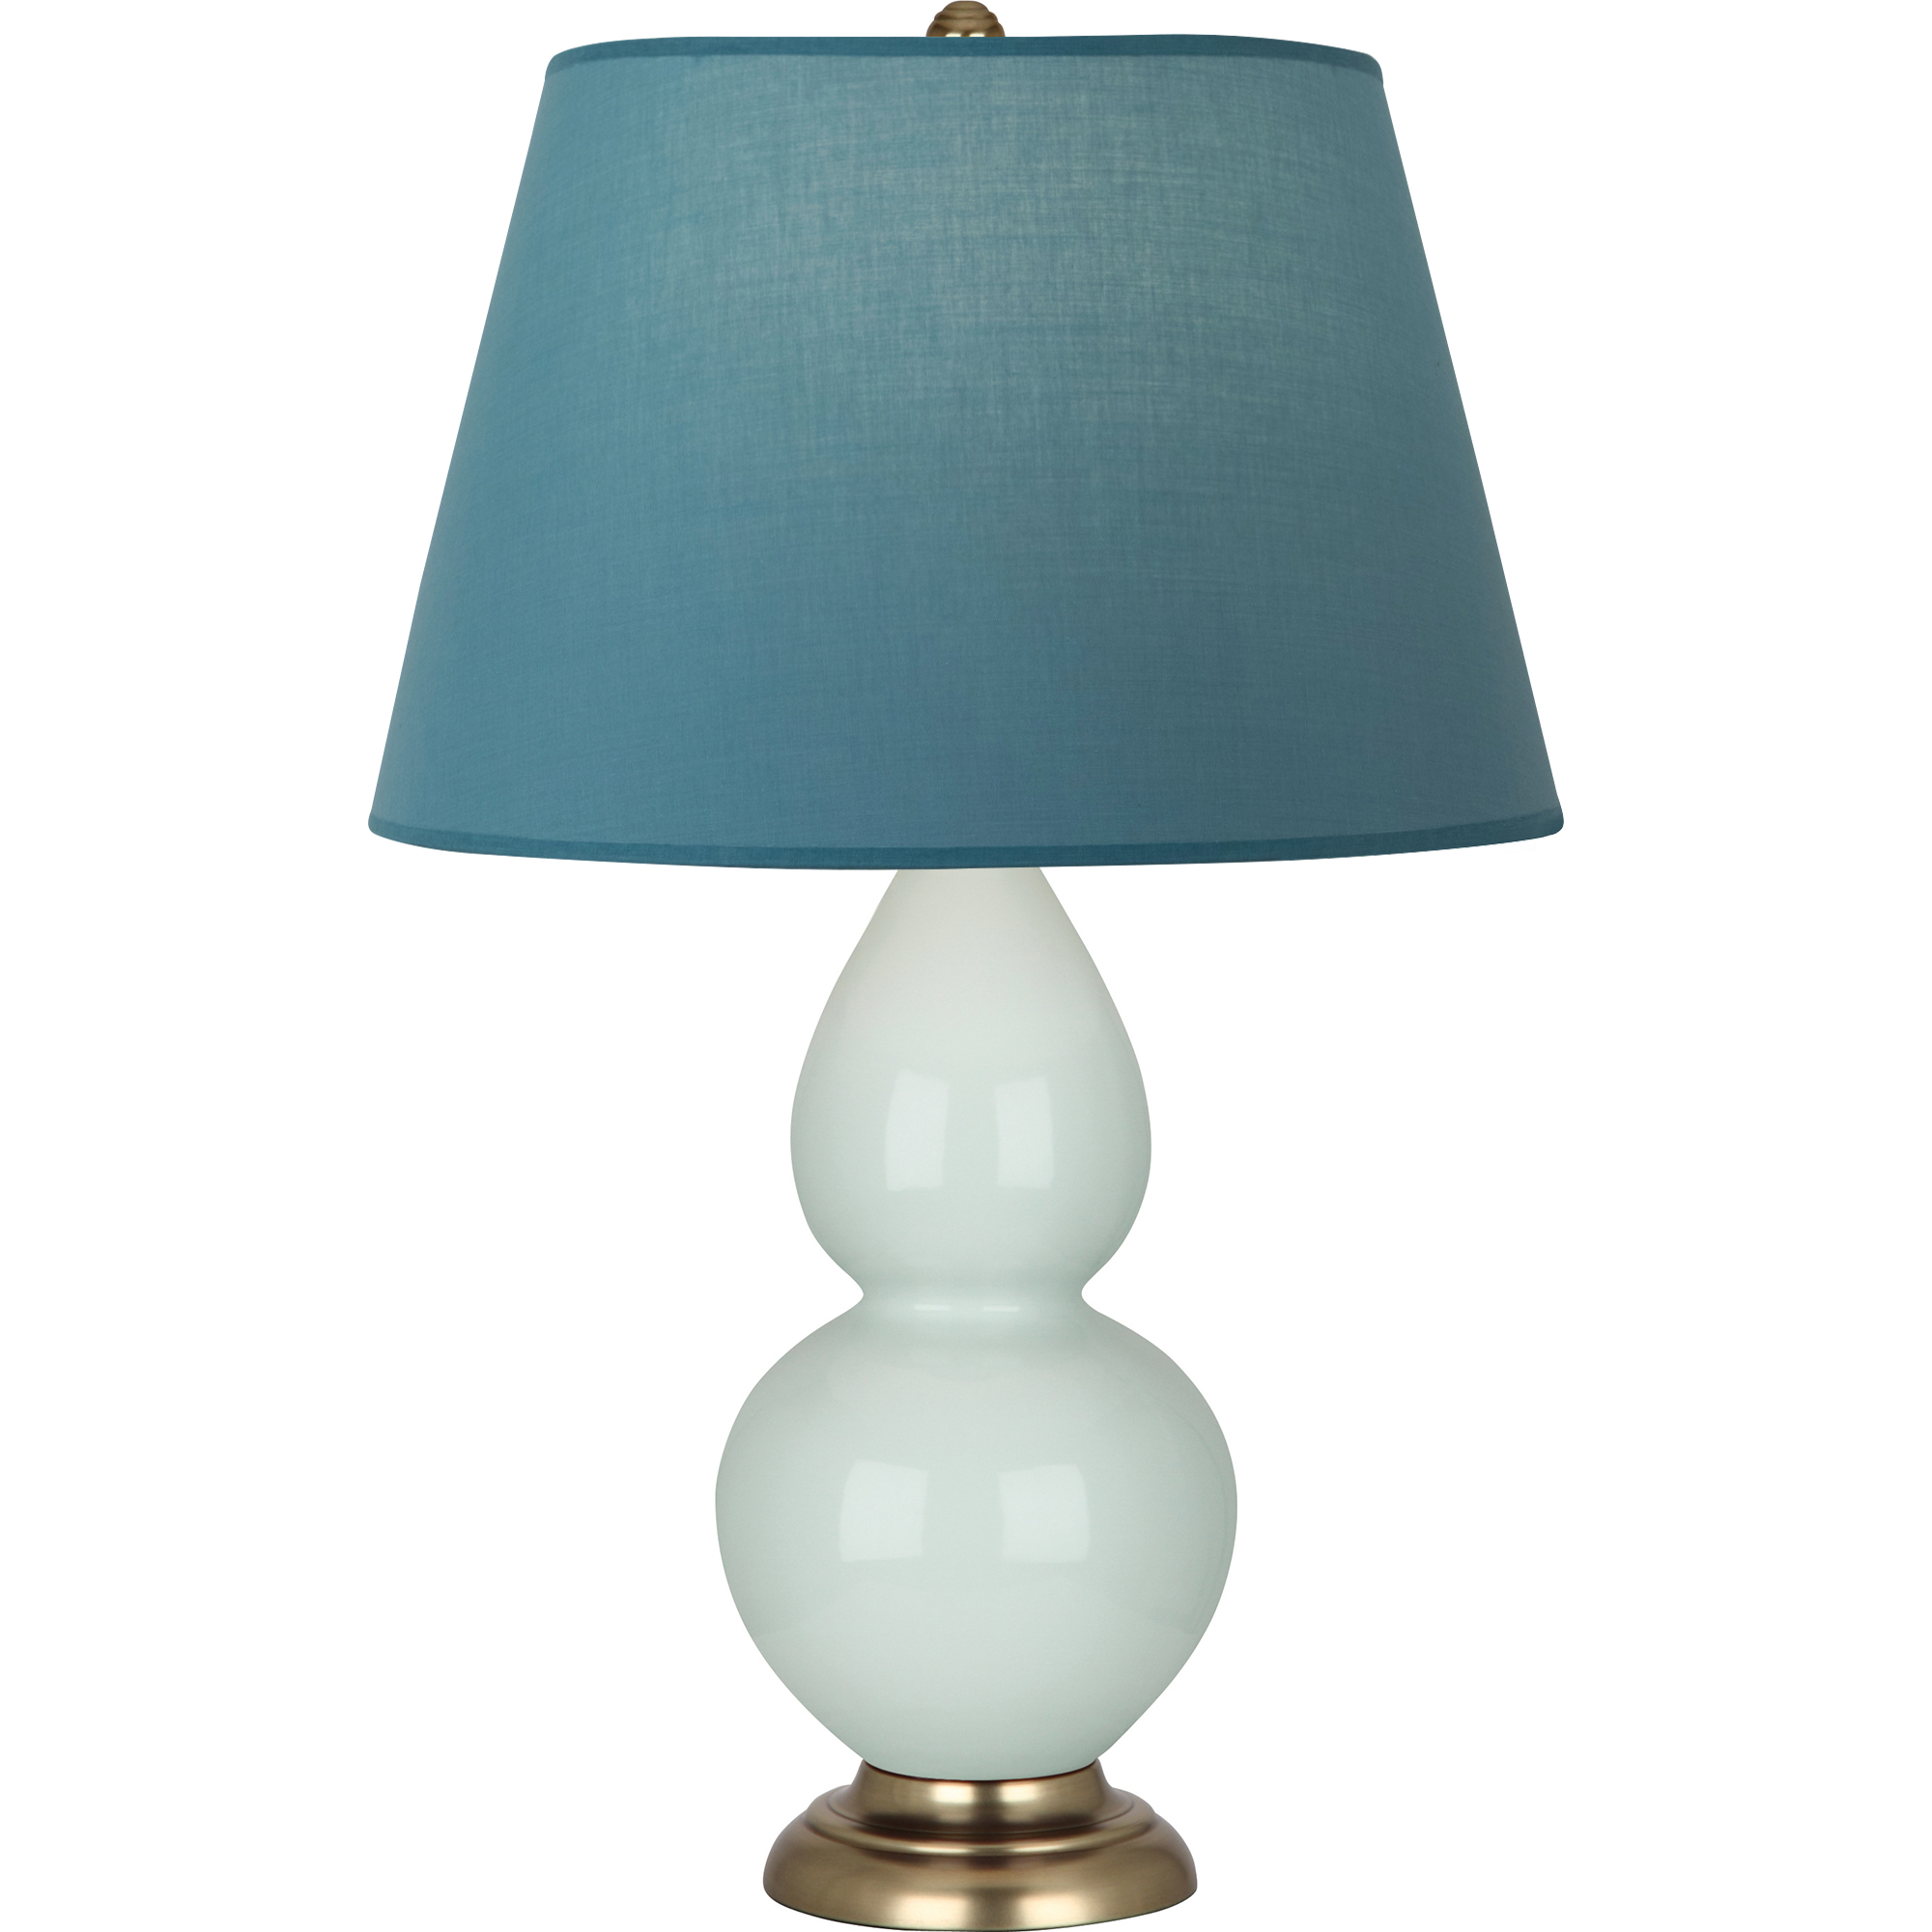 Double Gourd Table Lamp Style #1789B